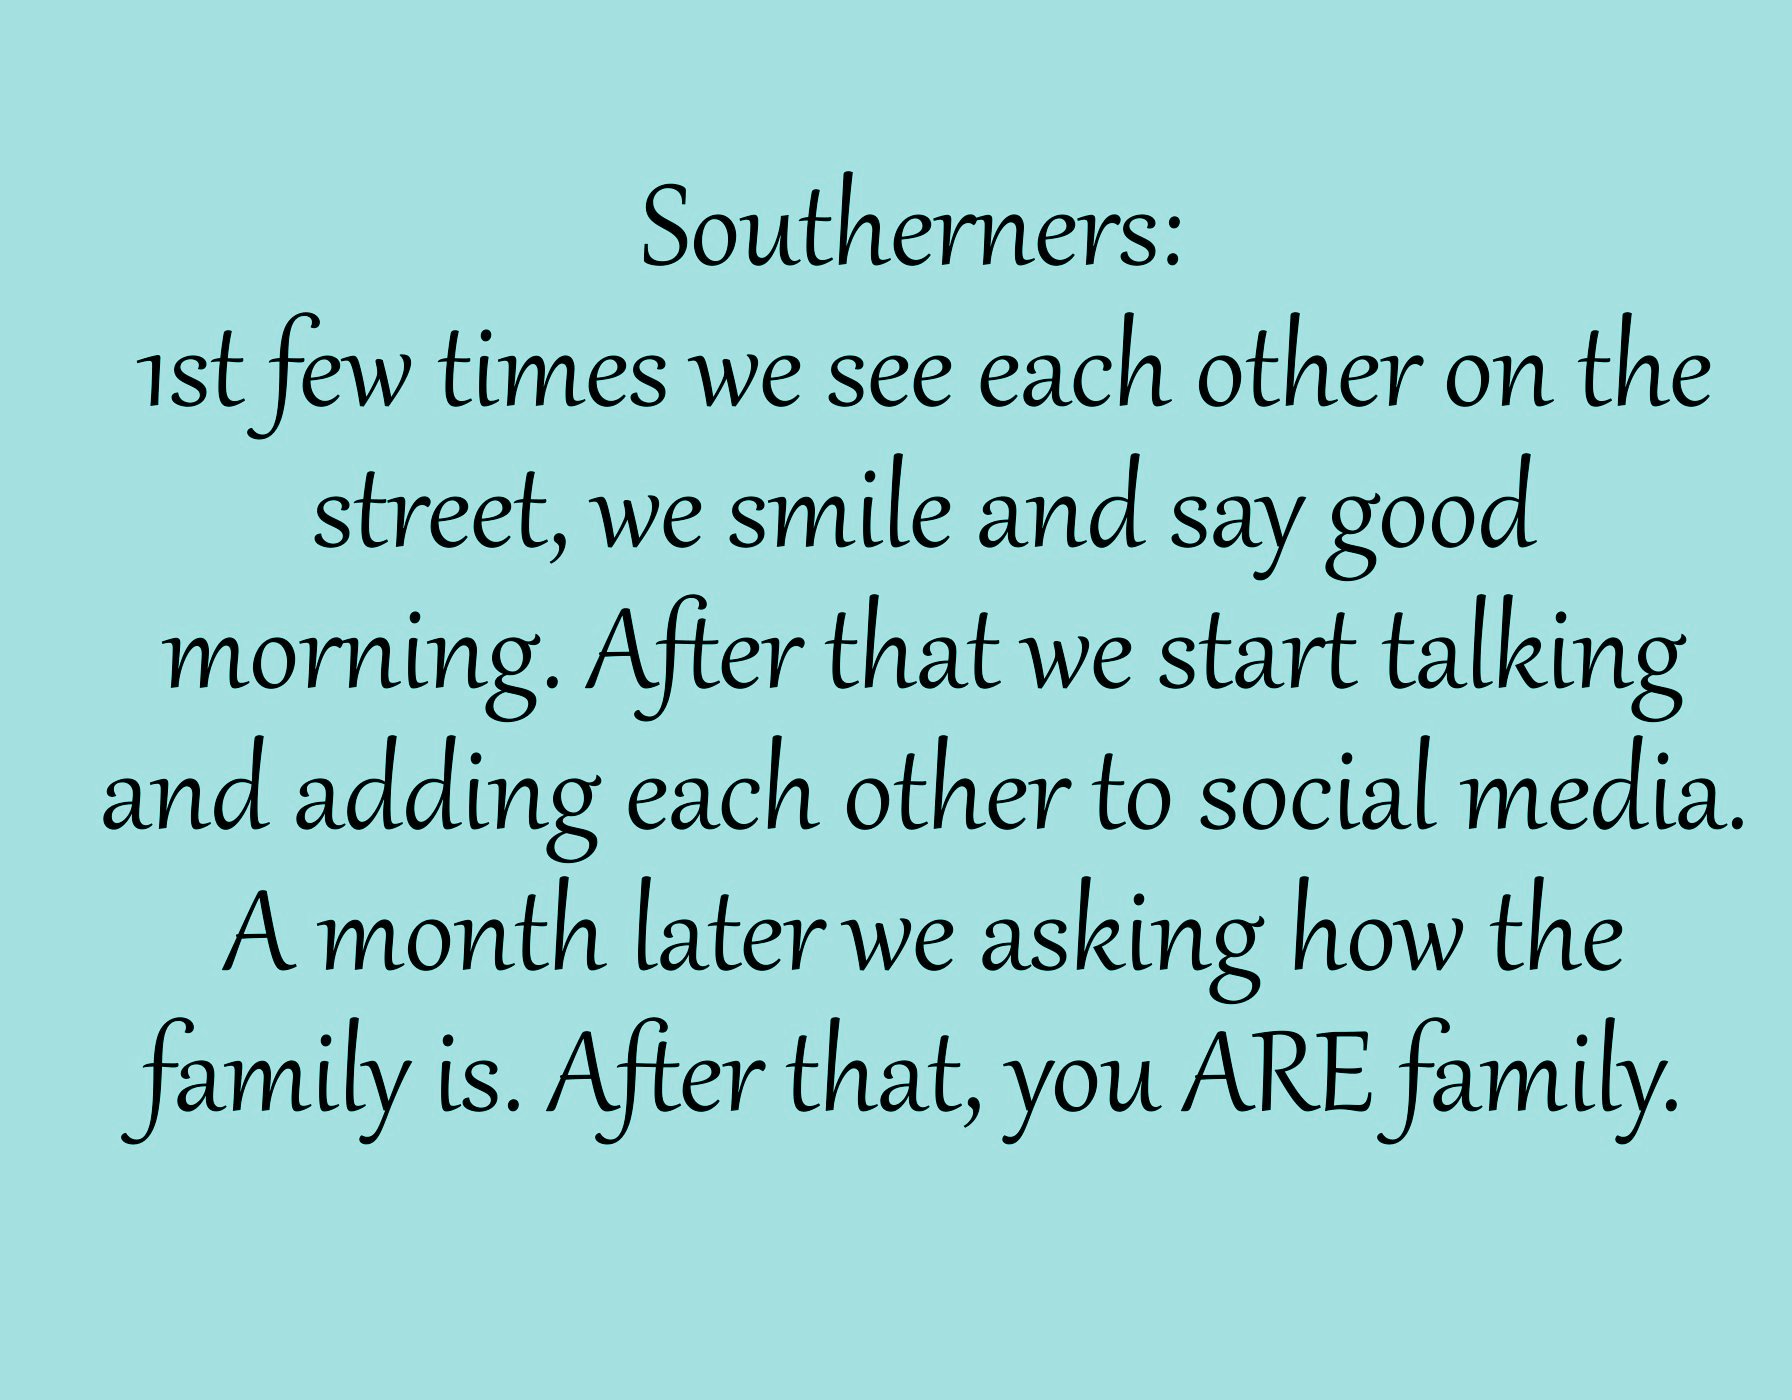 handwriting - Southerners ist few times we see each other on the street, we smile and say good morning. After that we start talking and adding each other to social media. A month later we asking how the family is. After that, you Are family.